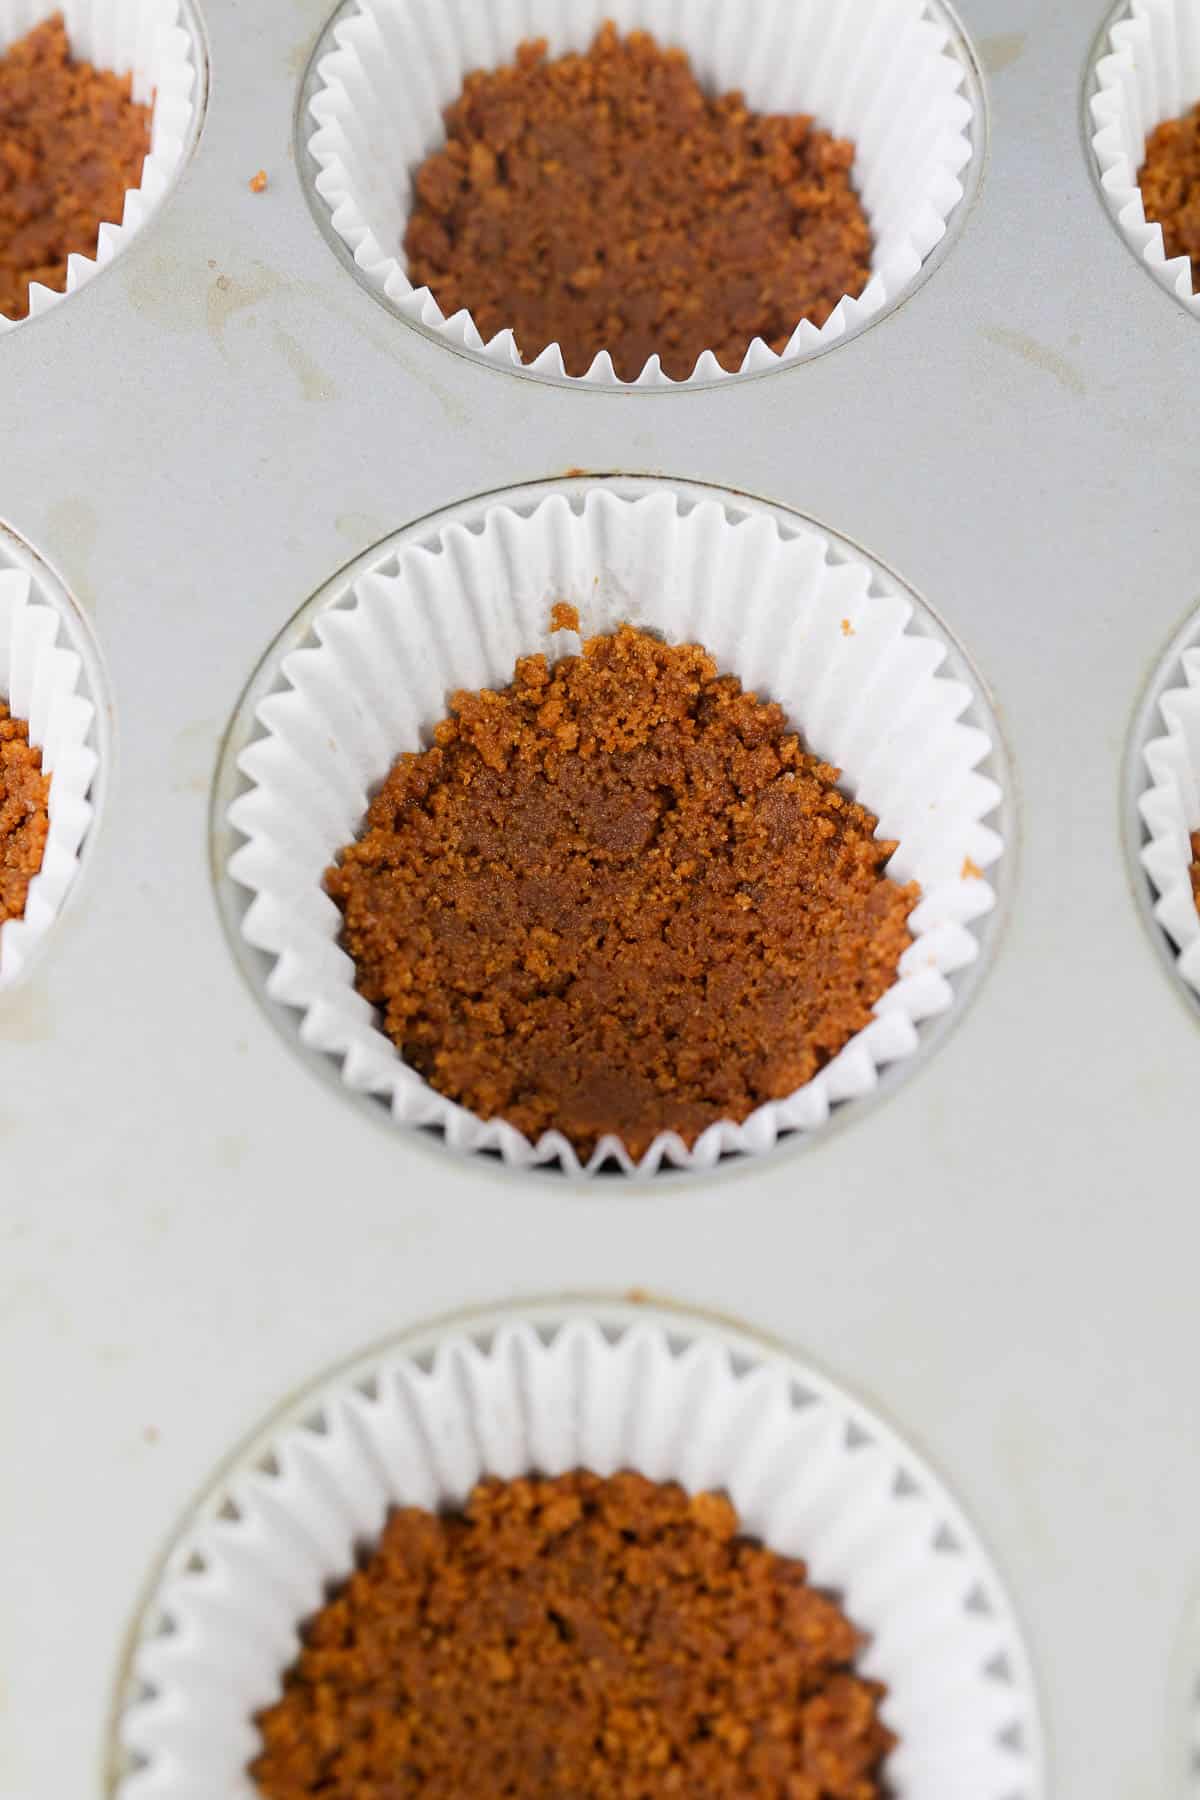 A cupcake pan with liners and a biscoff cookie crust packed in the bottom of it